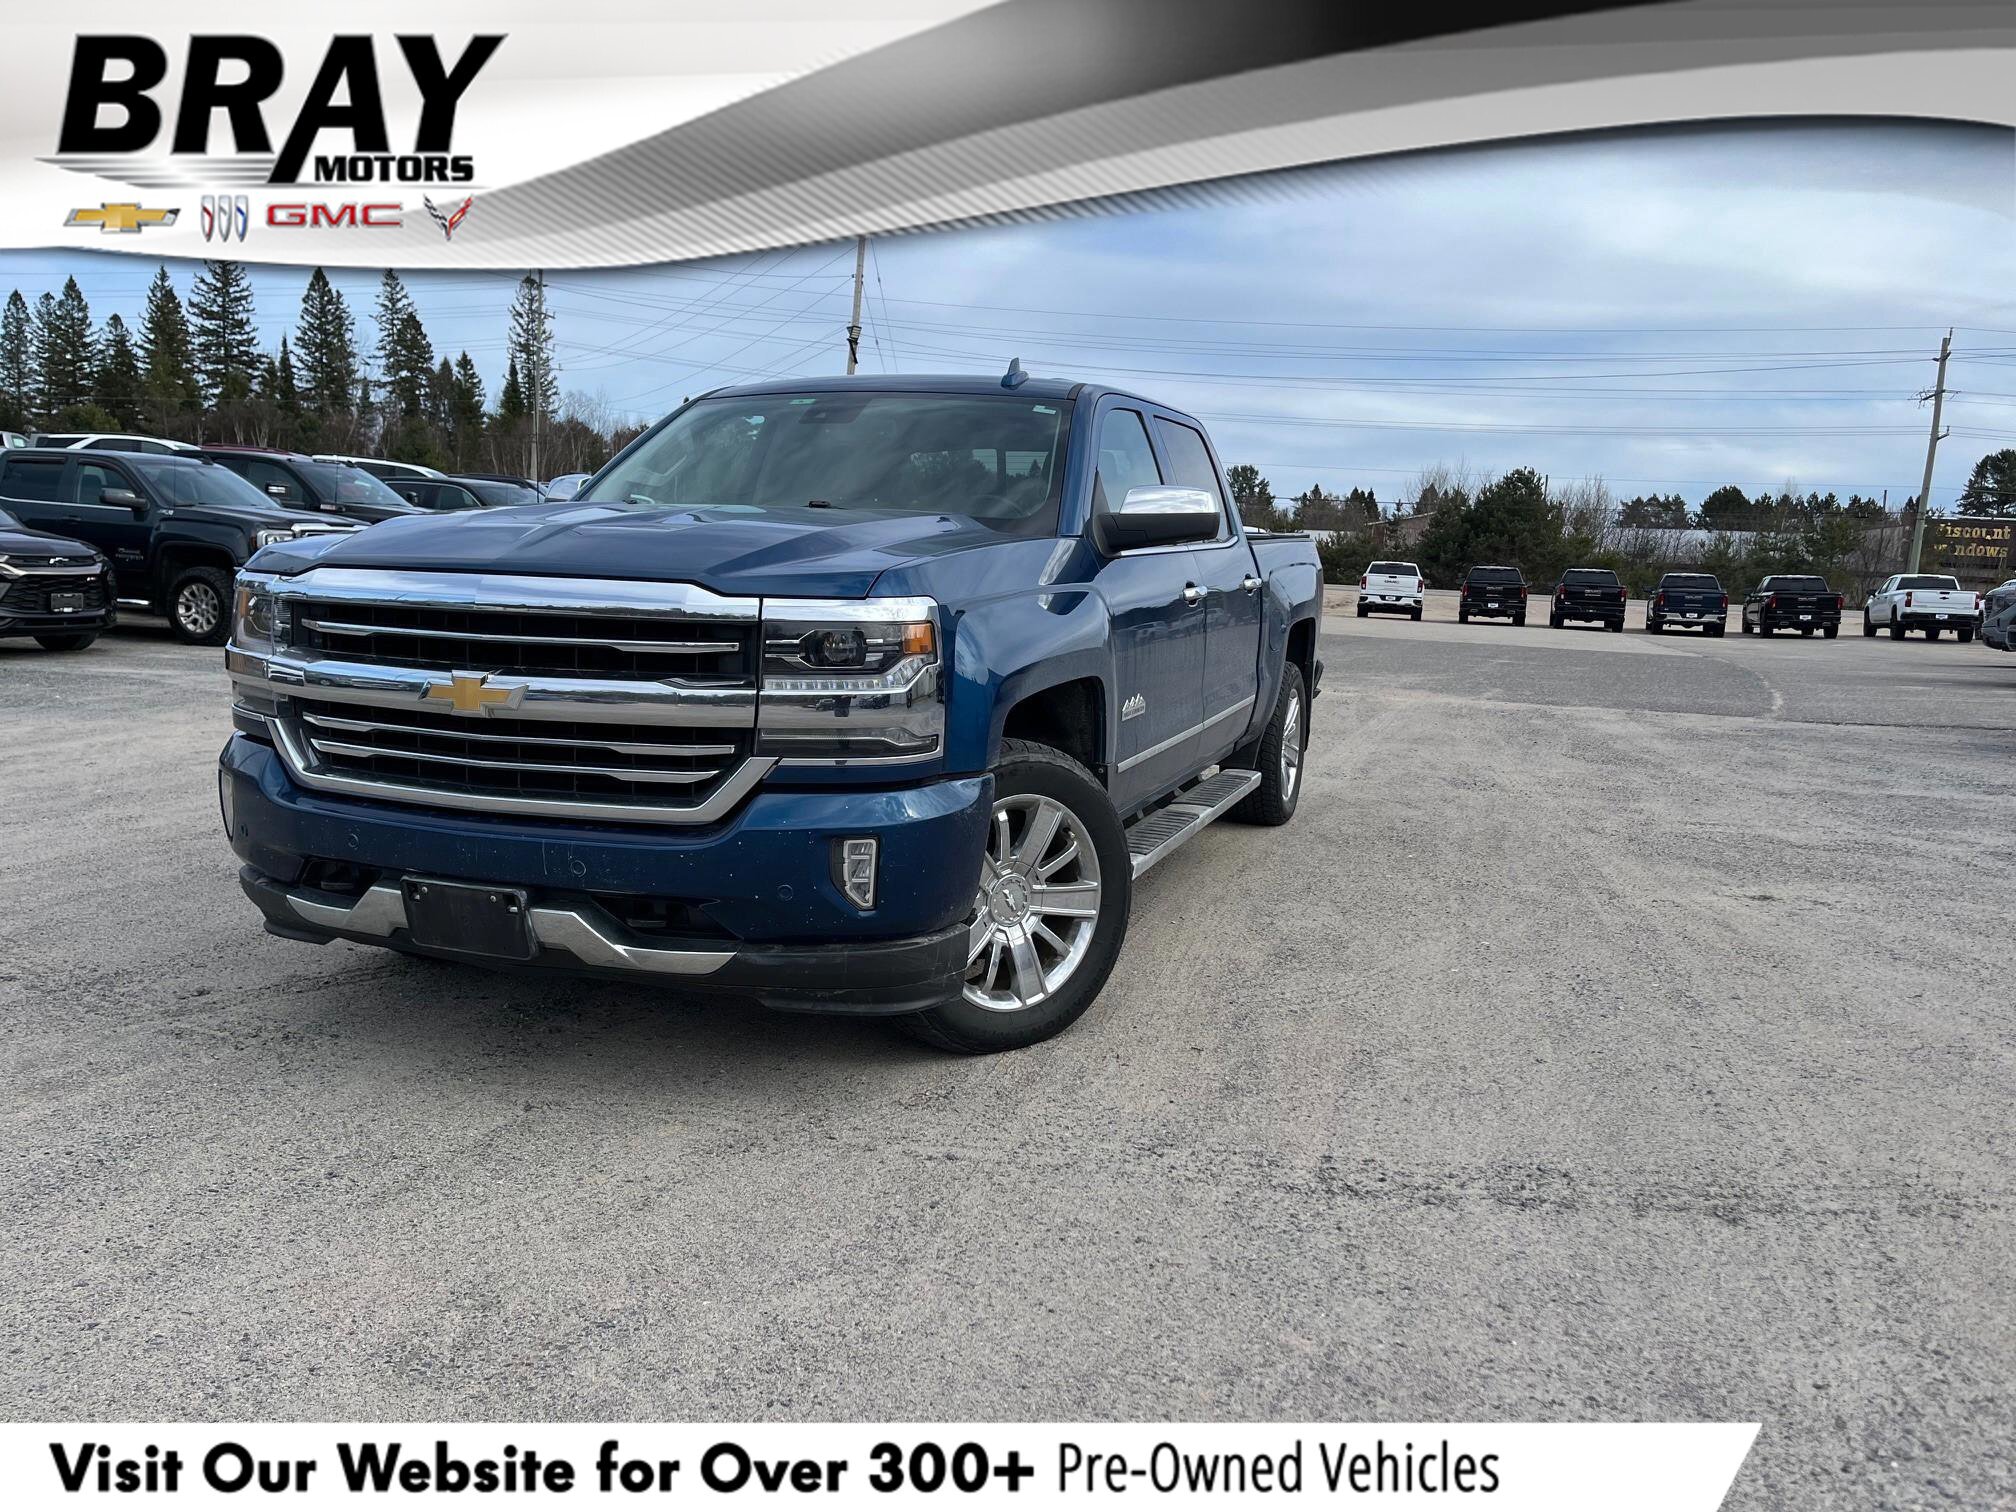 2018 Chevrolet Silverado 1500 High Country CERTIFIED PRE-OWNED!